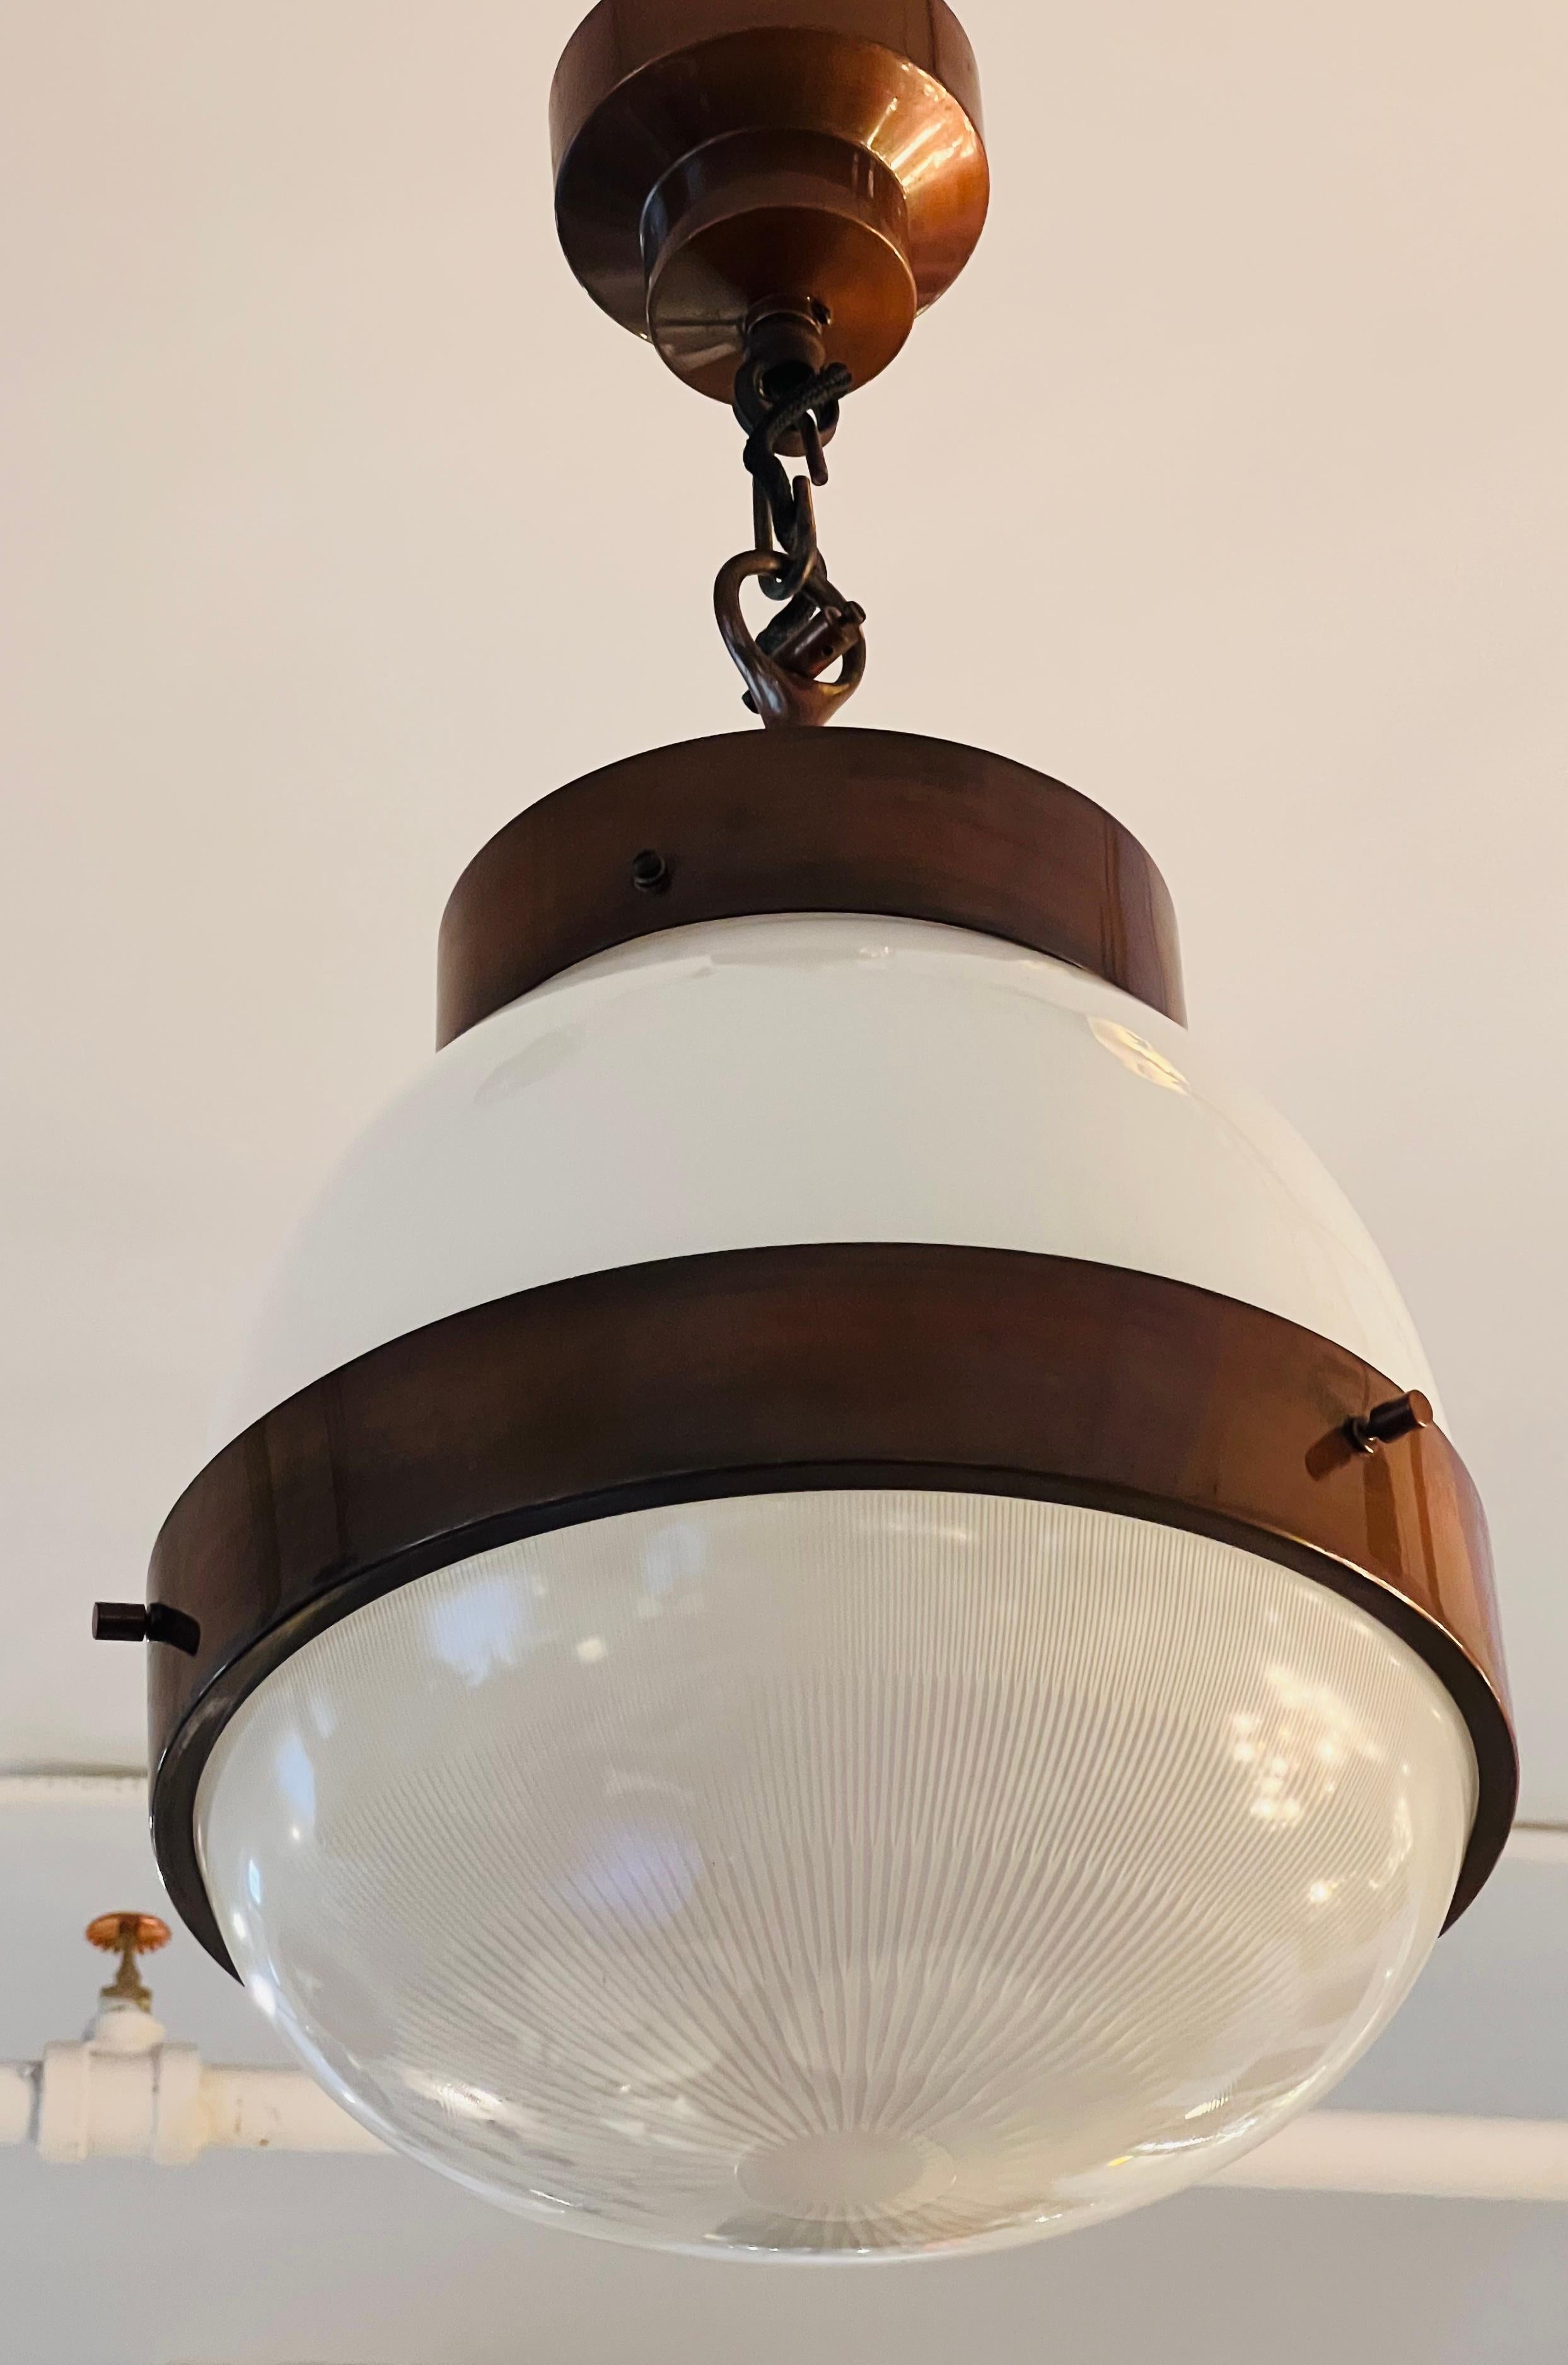 A beautiful 1960s Italian pendant lantern in a aged copper finish with two glass shades with the bottom being halothane glass. One Standard A socket 200 watts. Newly rewired.